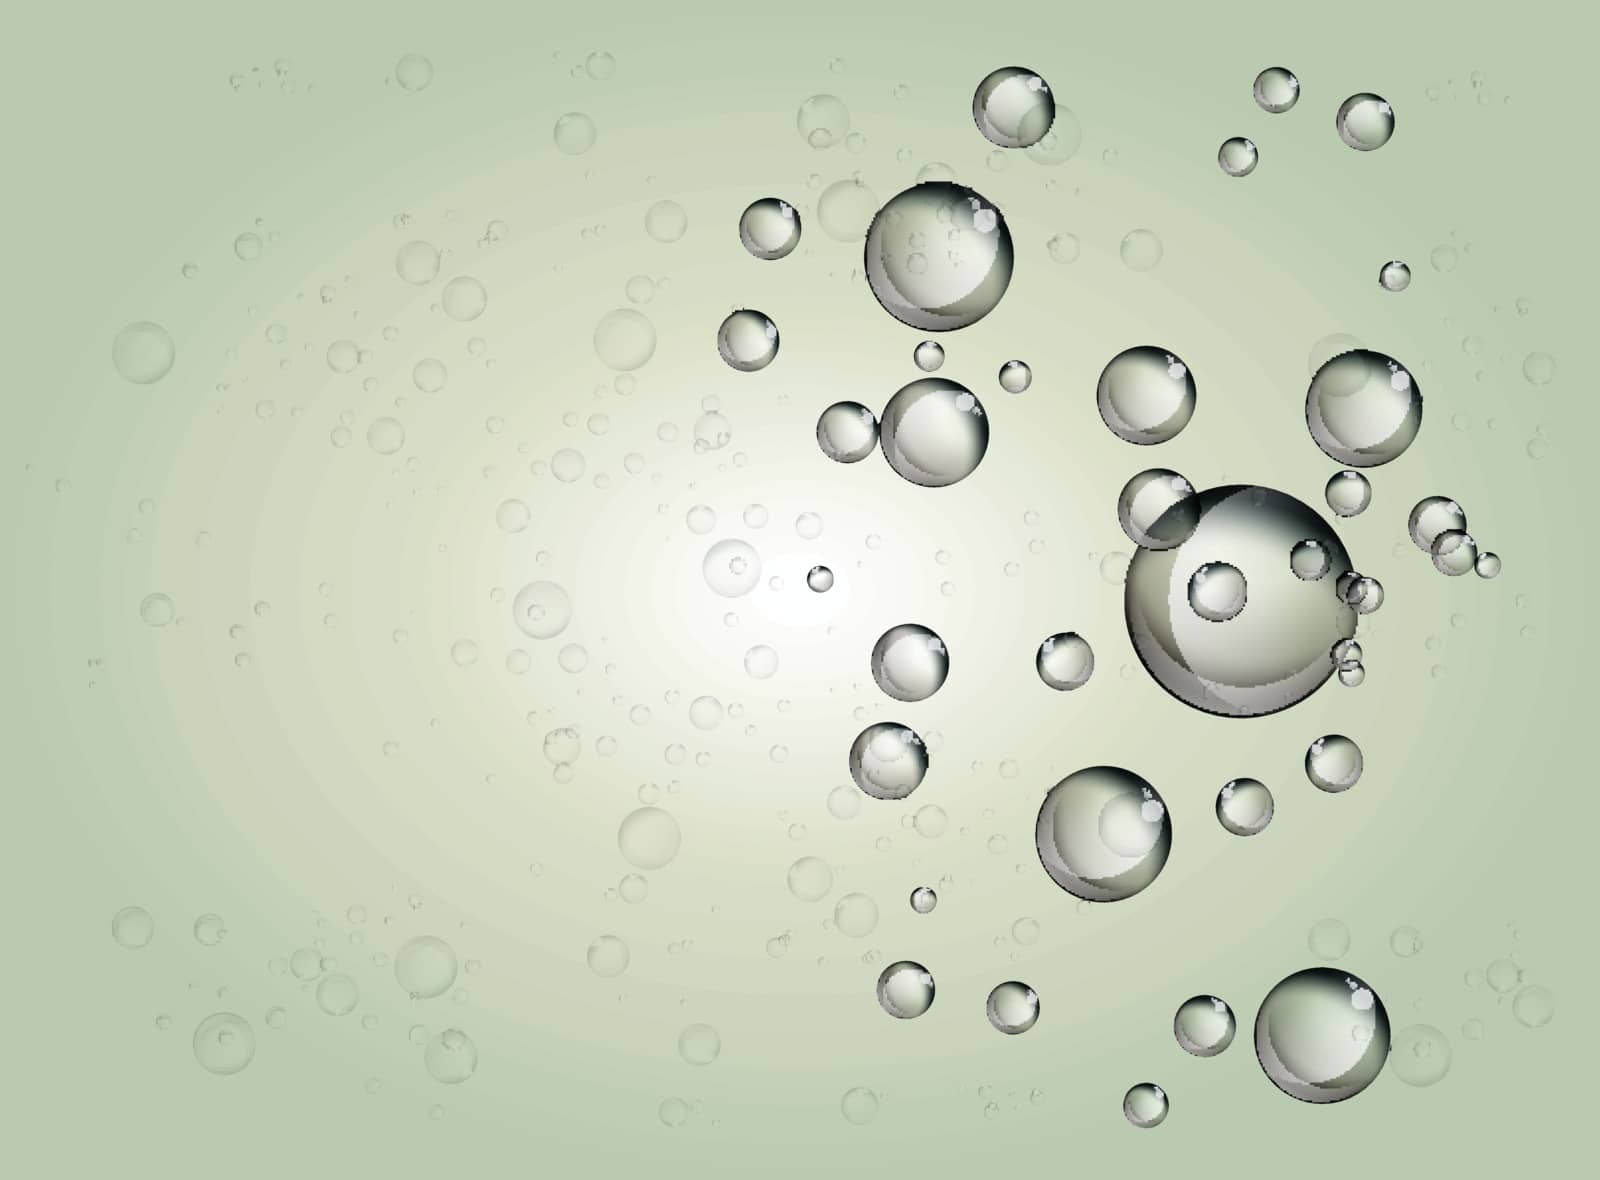 Water bubble rising on clear background. by BV23